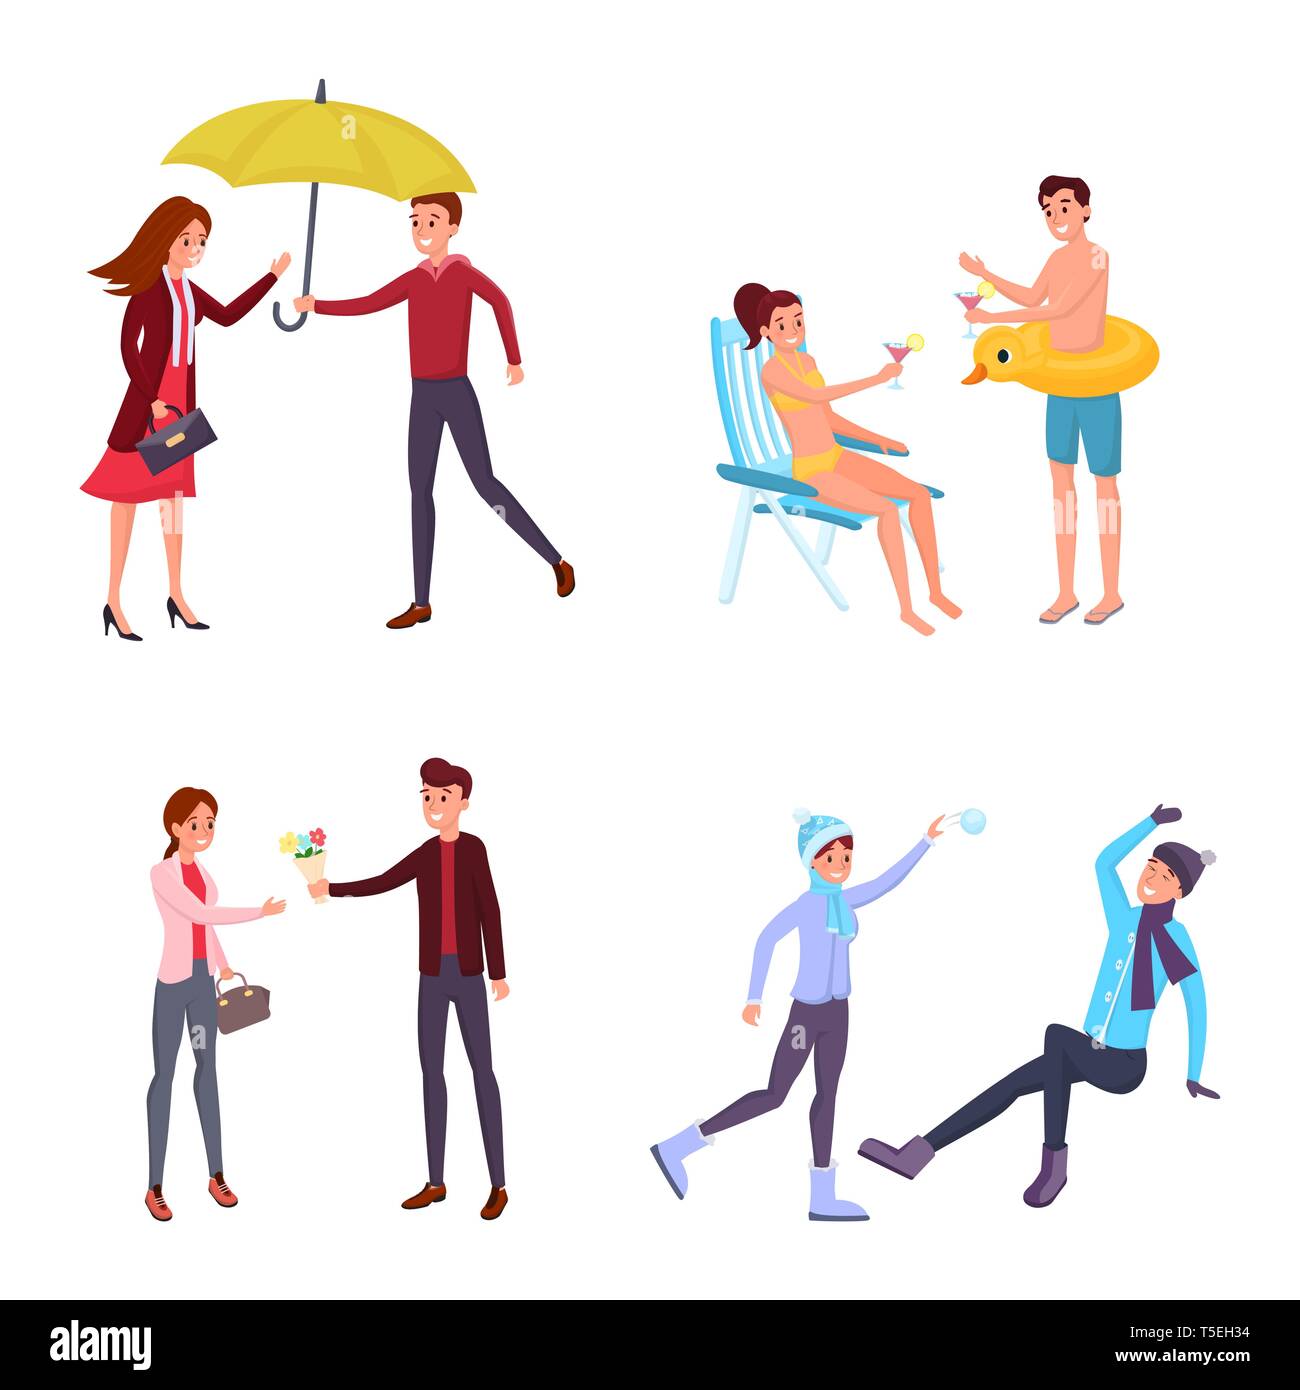 Couple seasonal outdoor activities illustrations set. Winter games, romantic date, summer holiday vacation isolated cliparts pack. Man and woman walking in park, sharing umbrella, sunbathing on beach Stock Vector